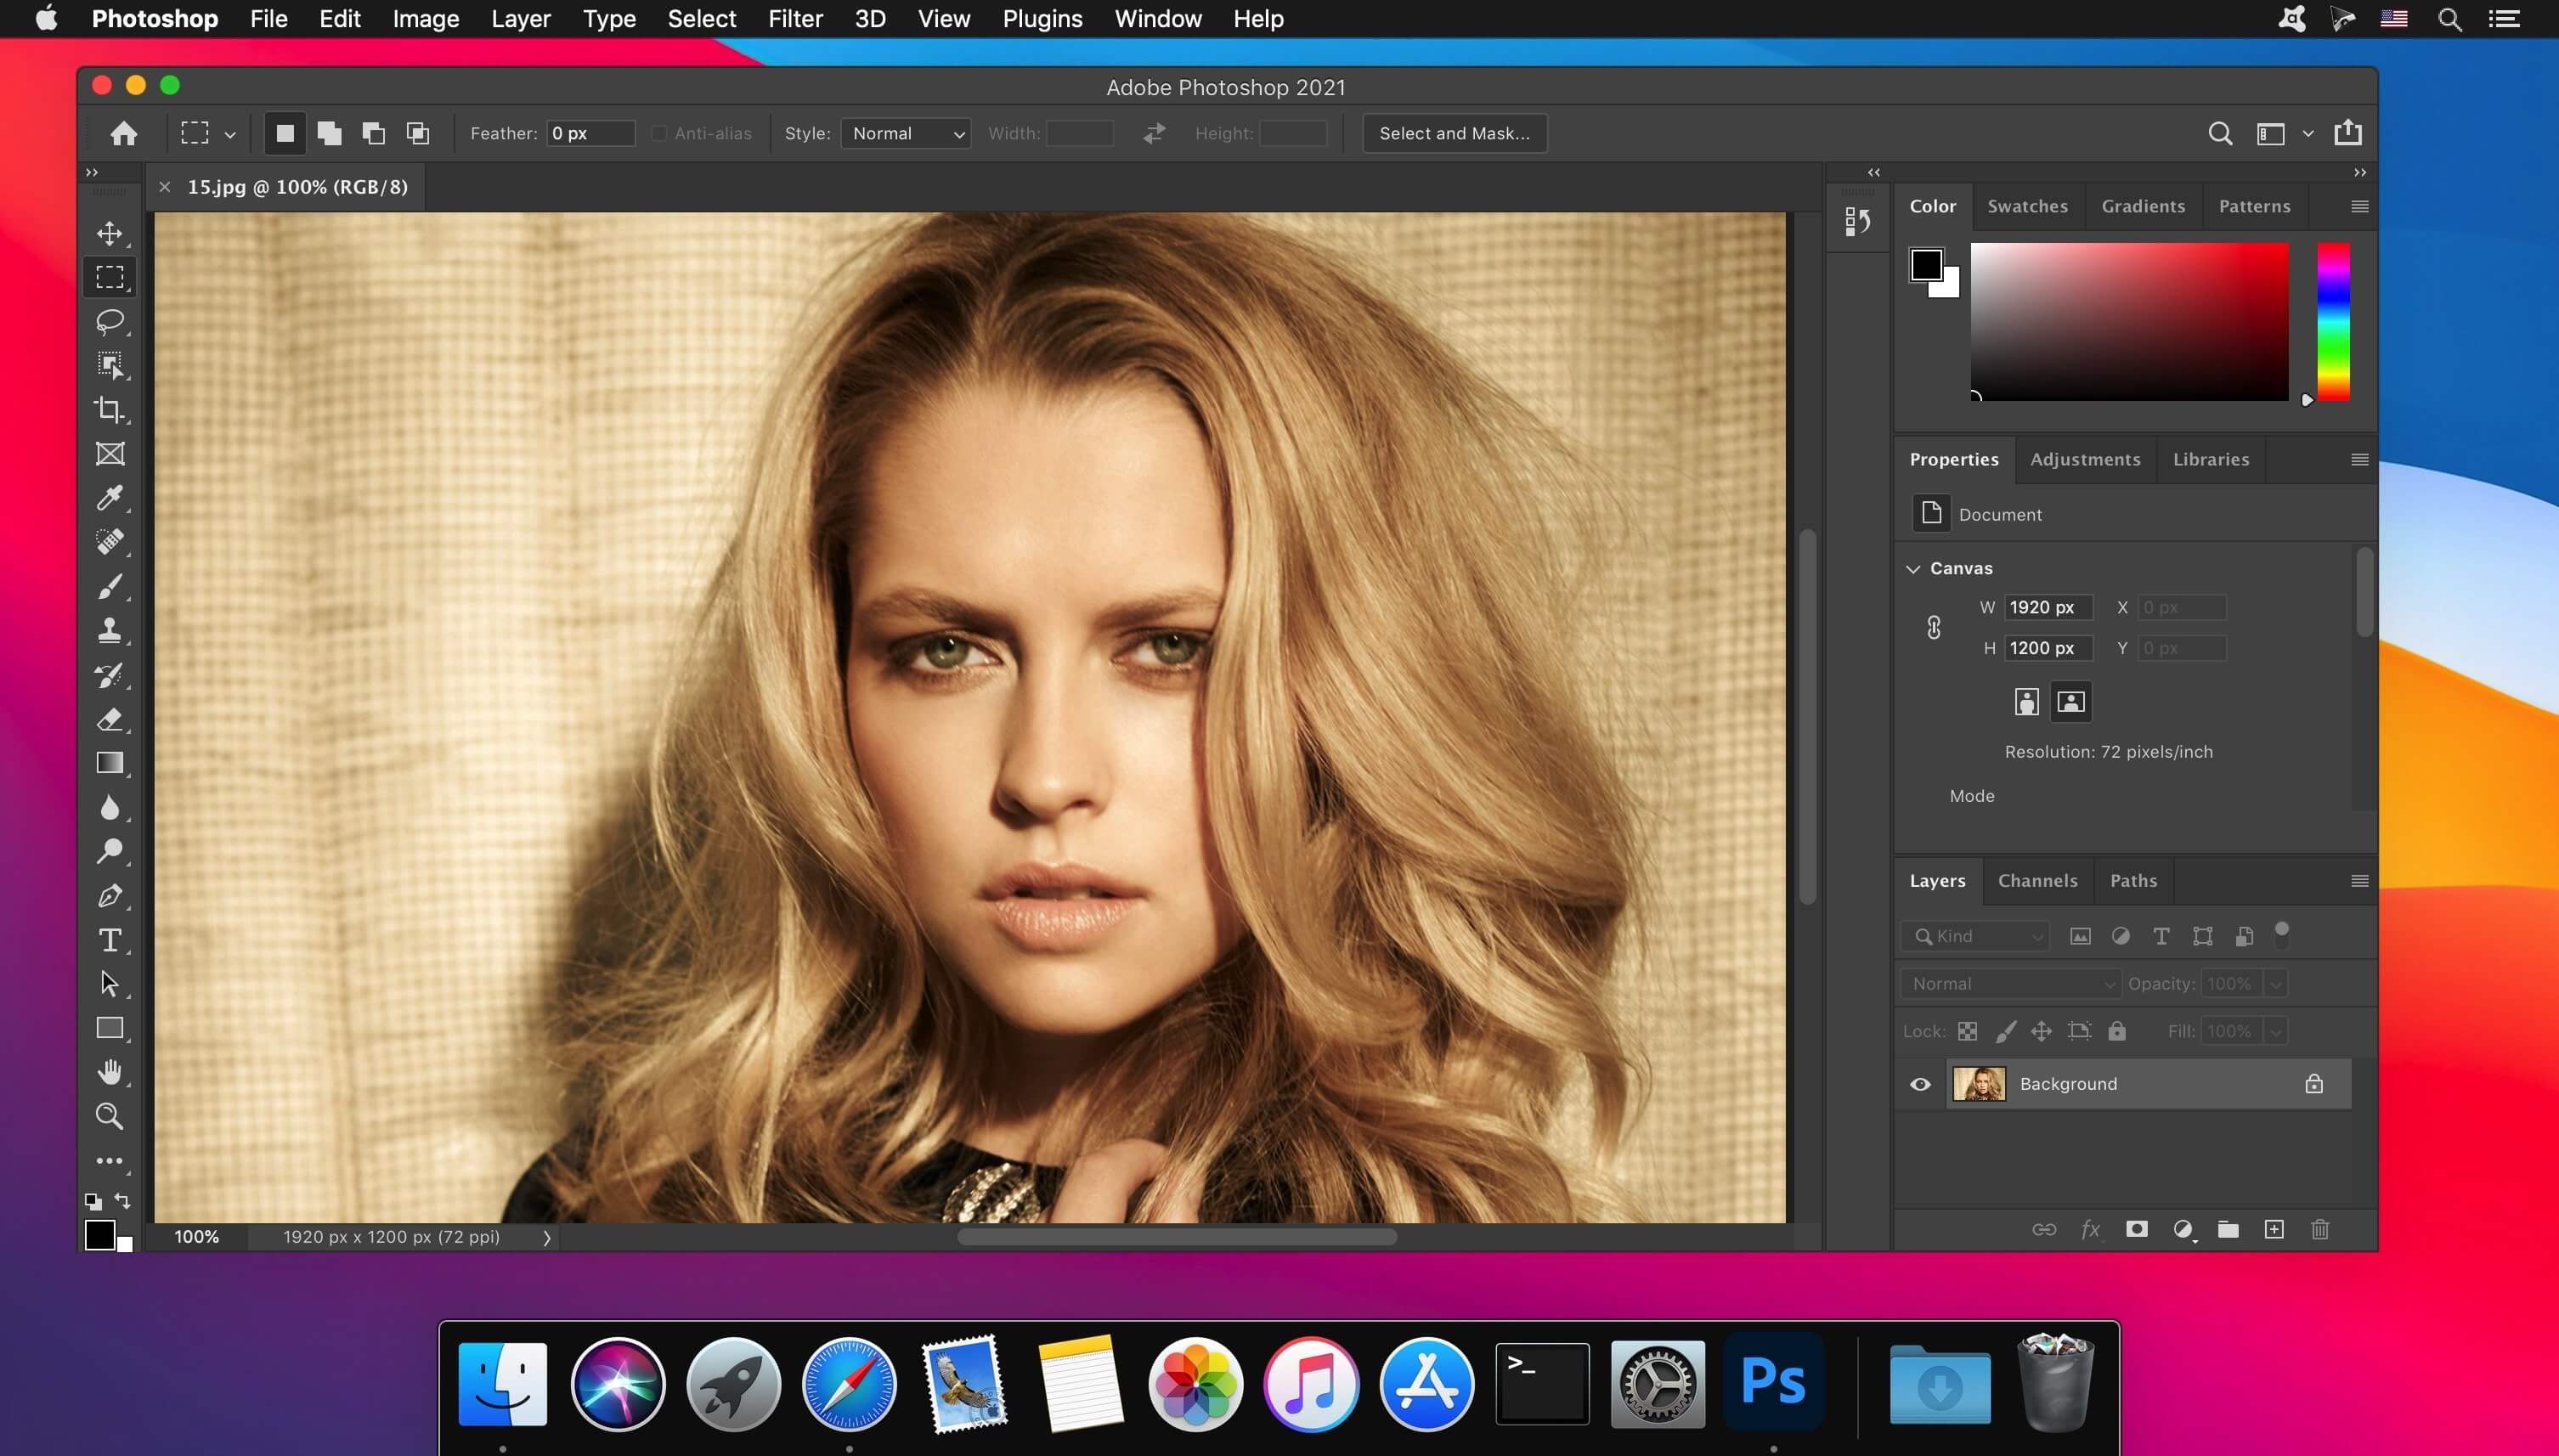 how to make an image larger in photoshop